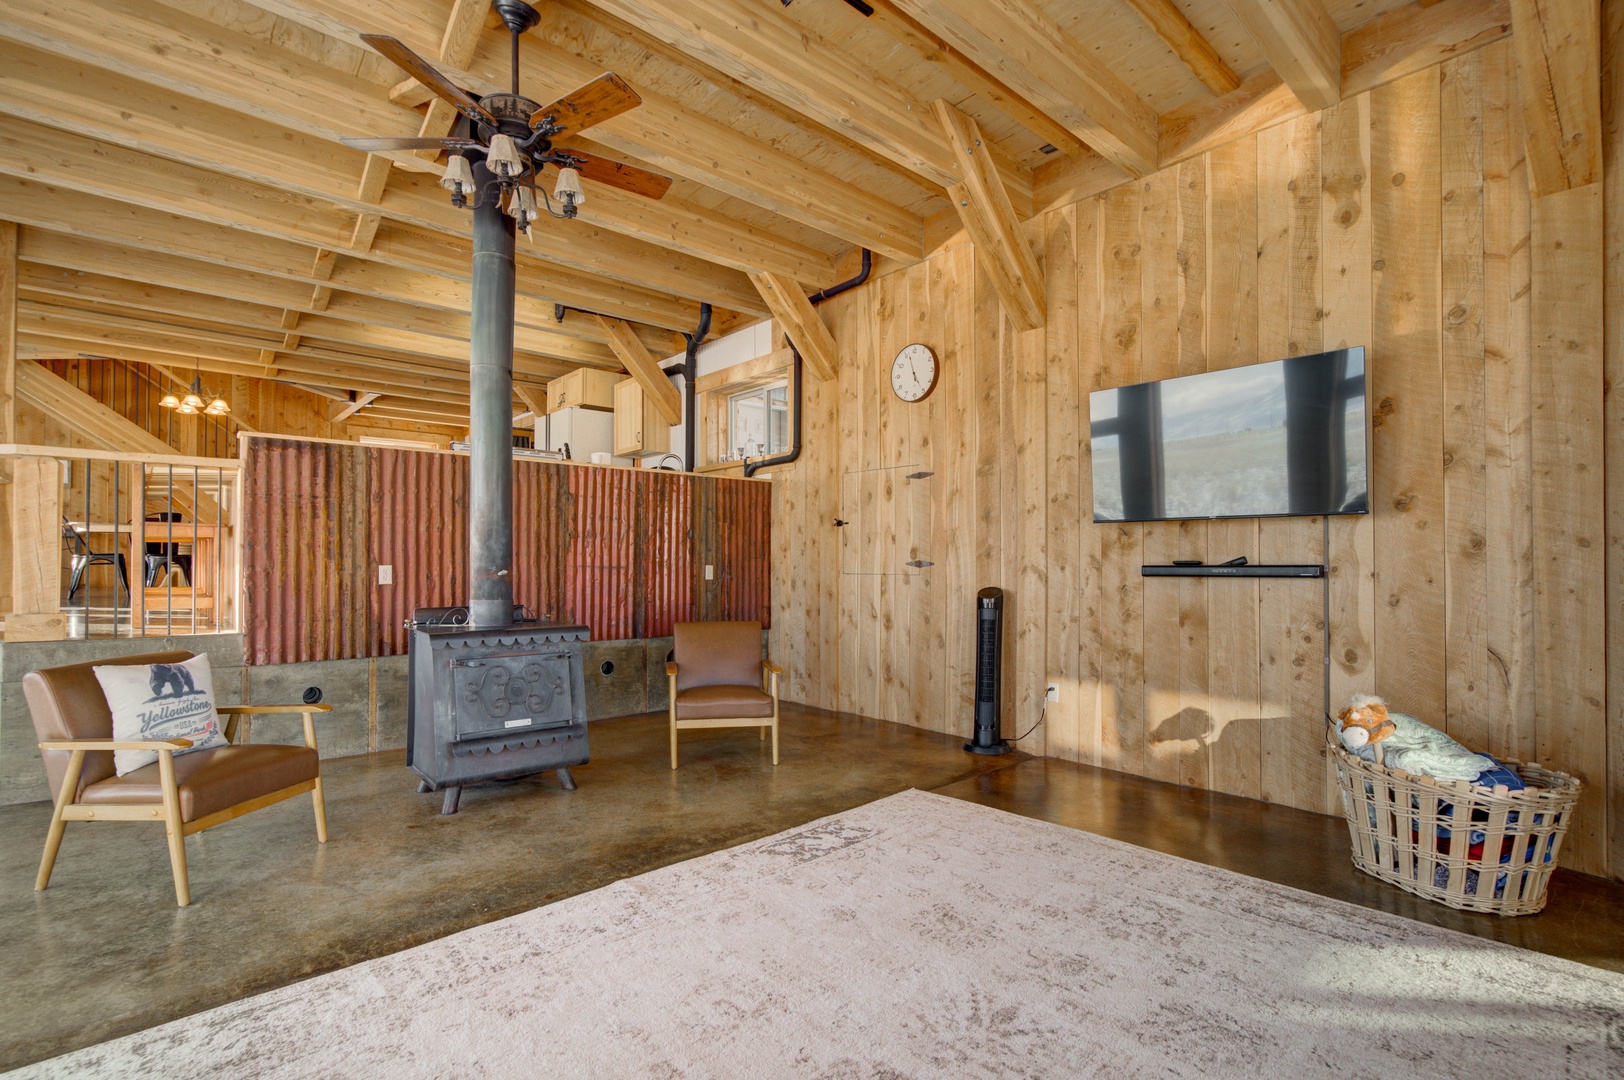 Livingston Vacation Rentals, OFB Sunset Grove - Living room with flatscreen tv and cozy wood stove